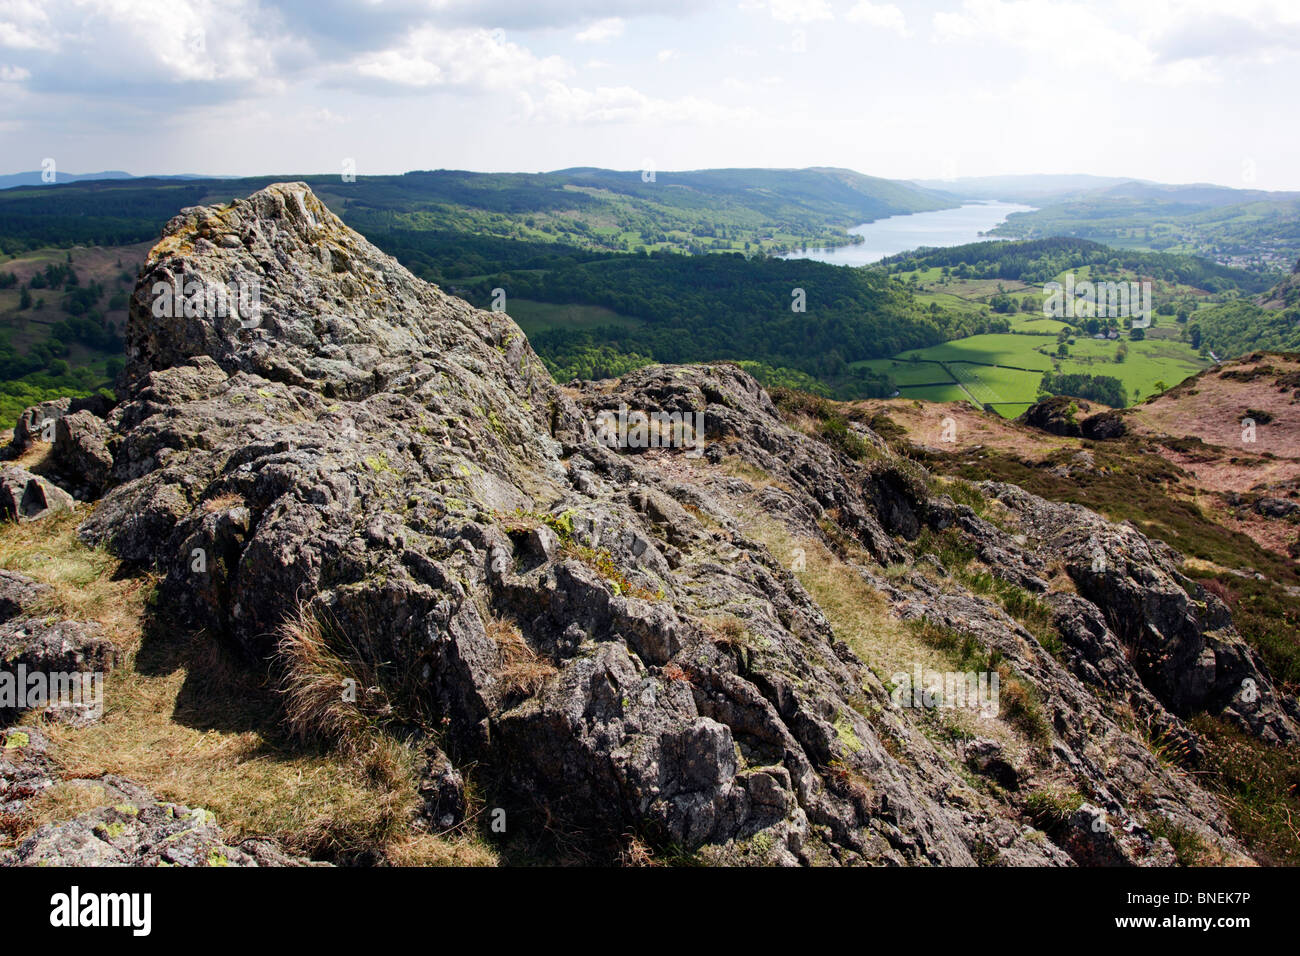 Craggy outcrop on Holme Fell near Coniston in the Lake District ...